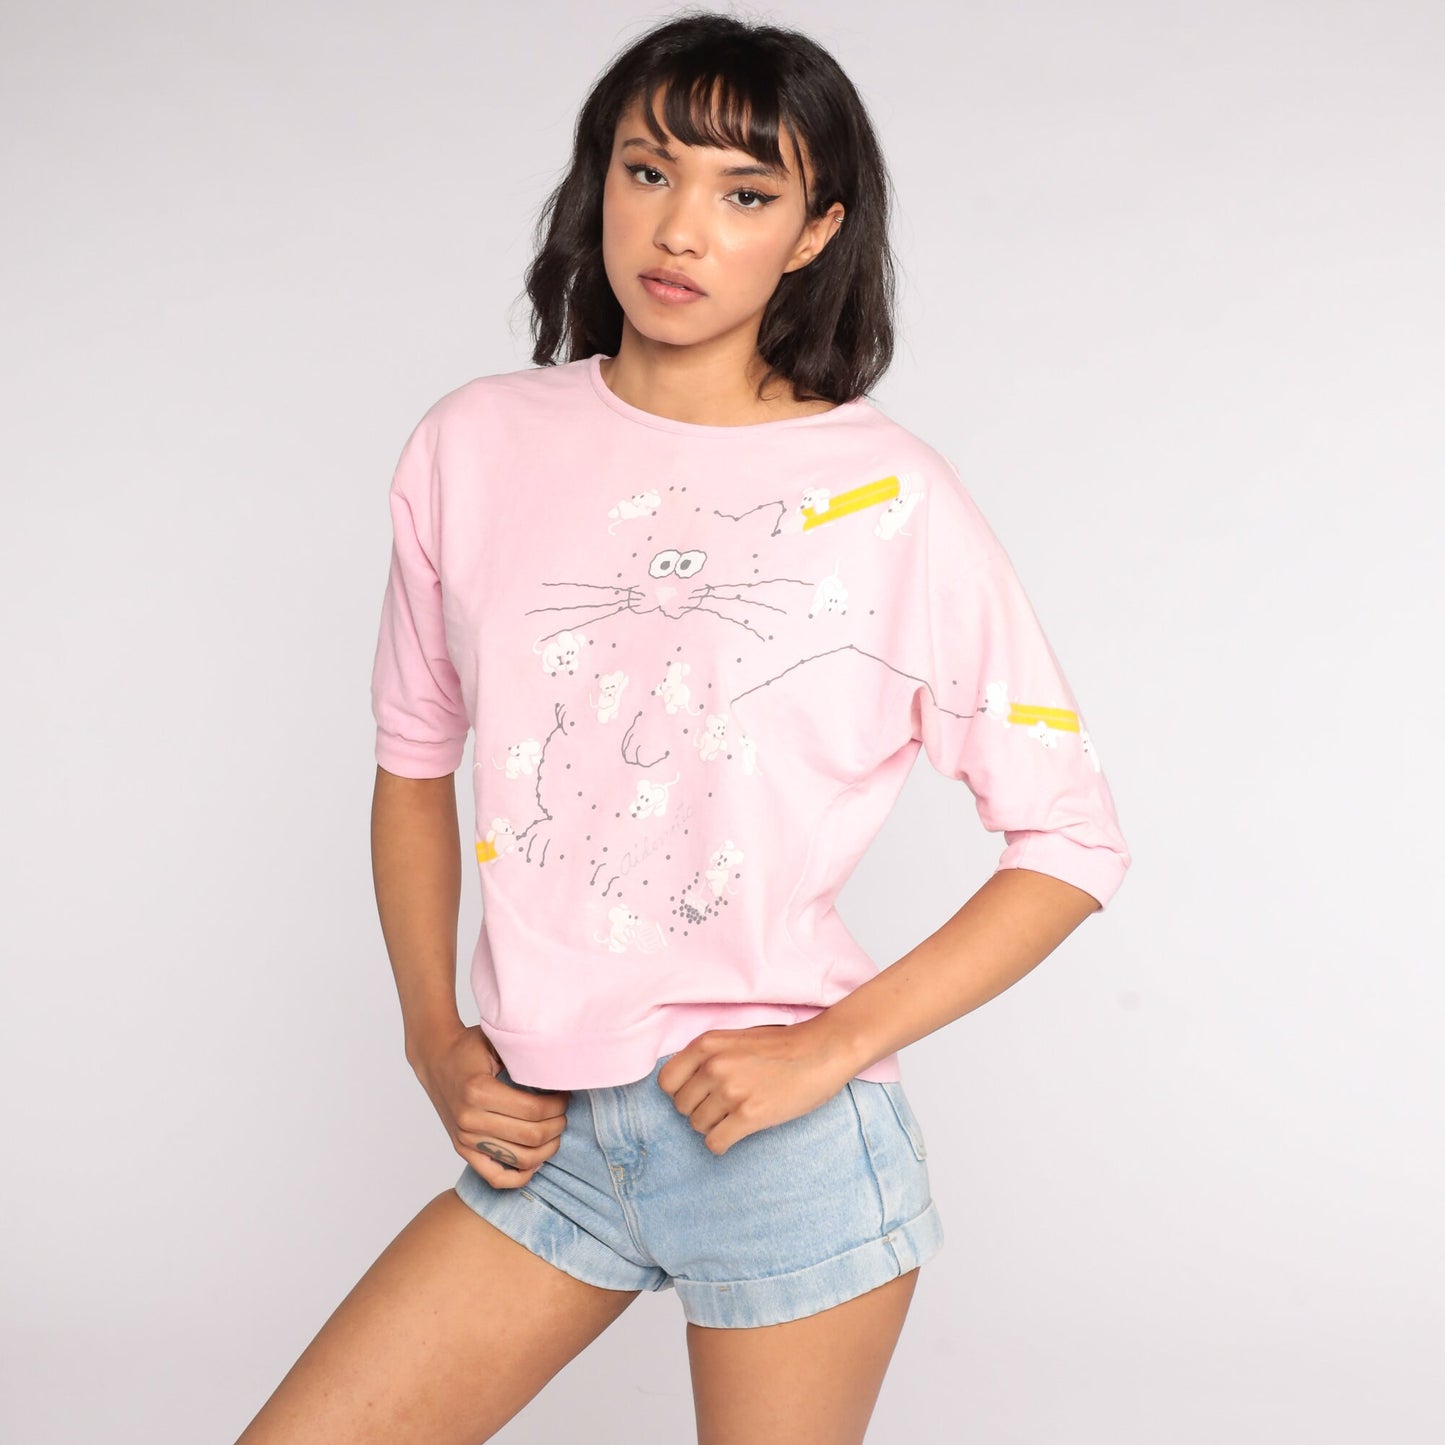 Cat Mouse Shirt CONNECT THE DOTS Tshirt Kawaii Animal Top 80s Graphic Baby Pink Tee Retro 1980s Vintage Tee T Shirt Small